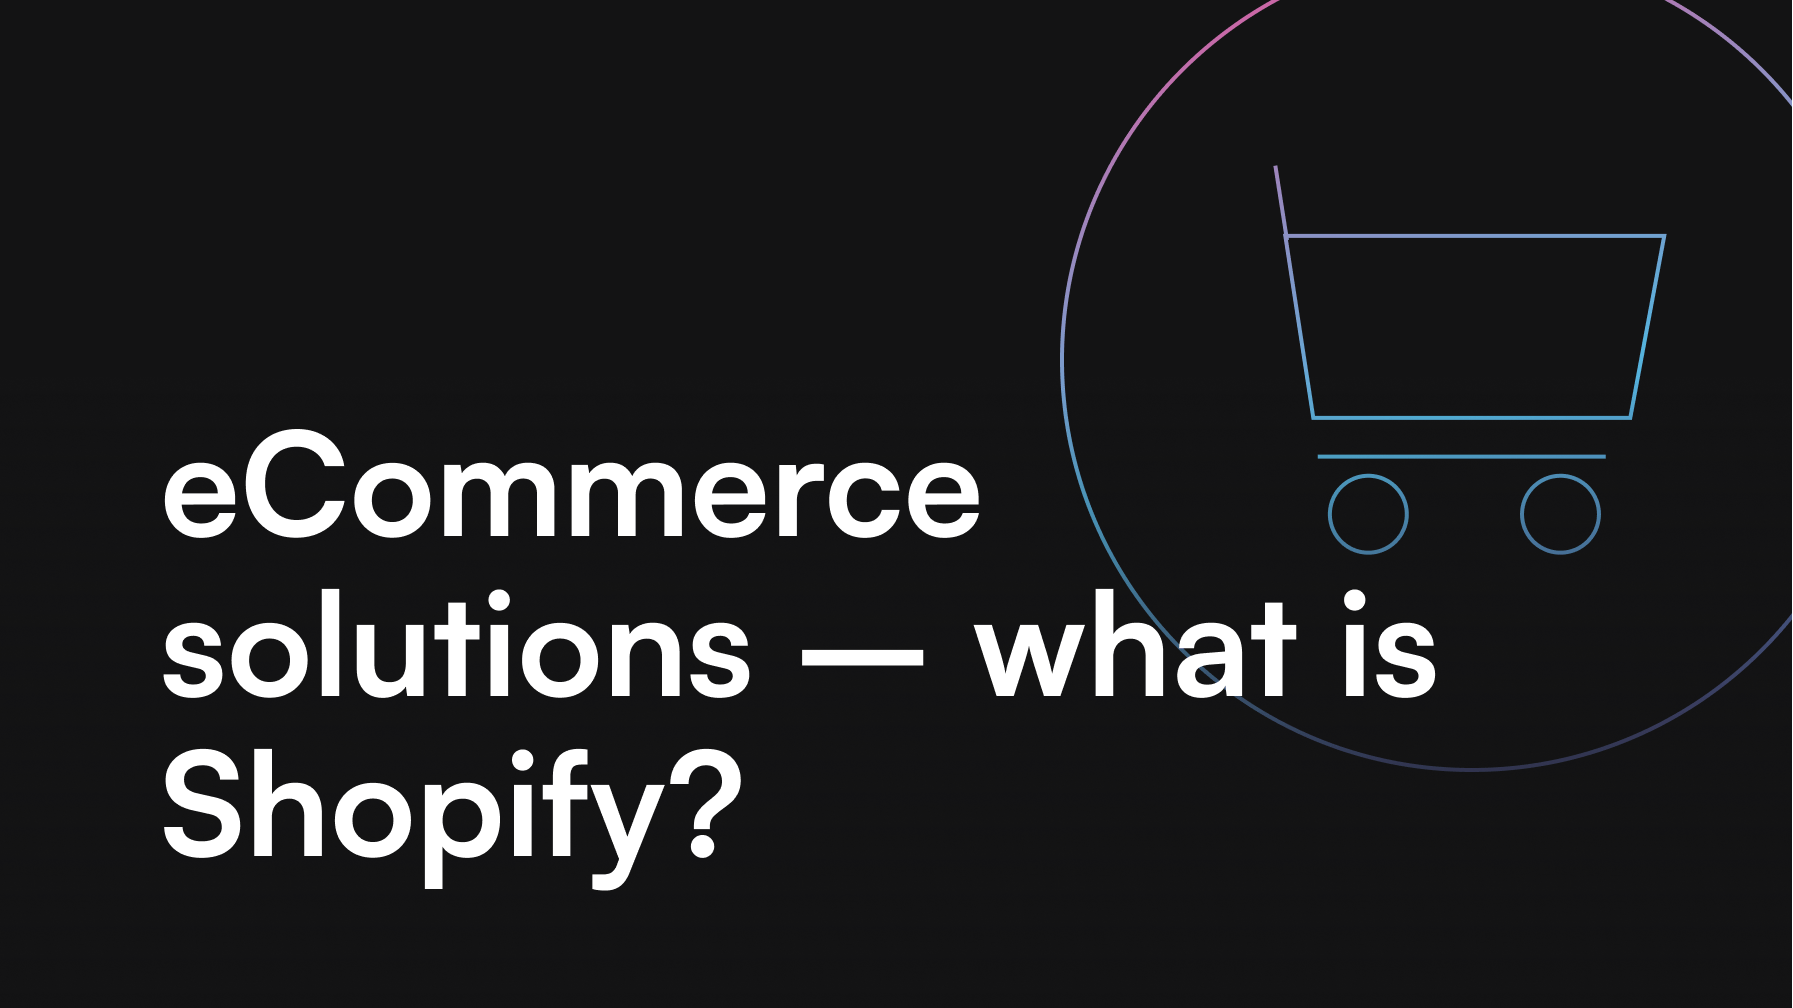 eCommerce solutions - what is Shopify?